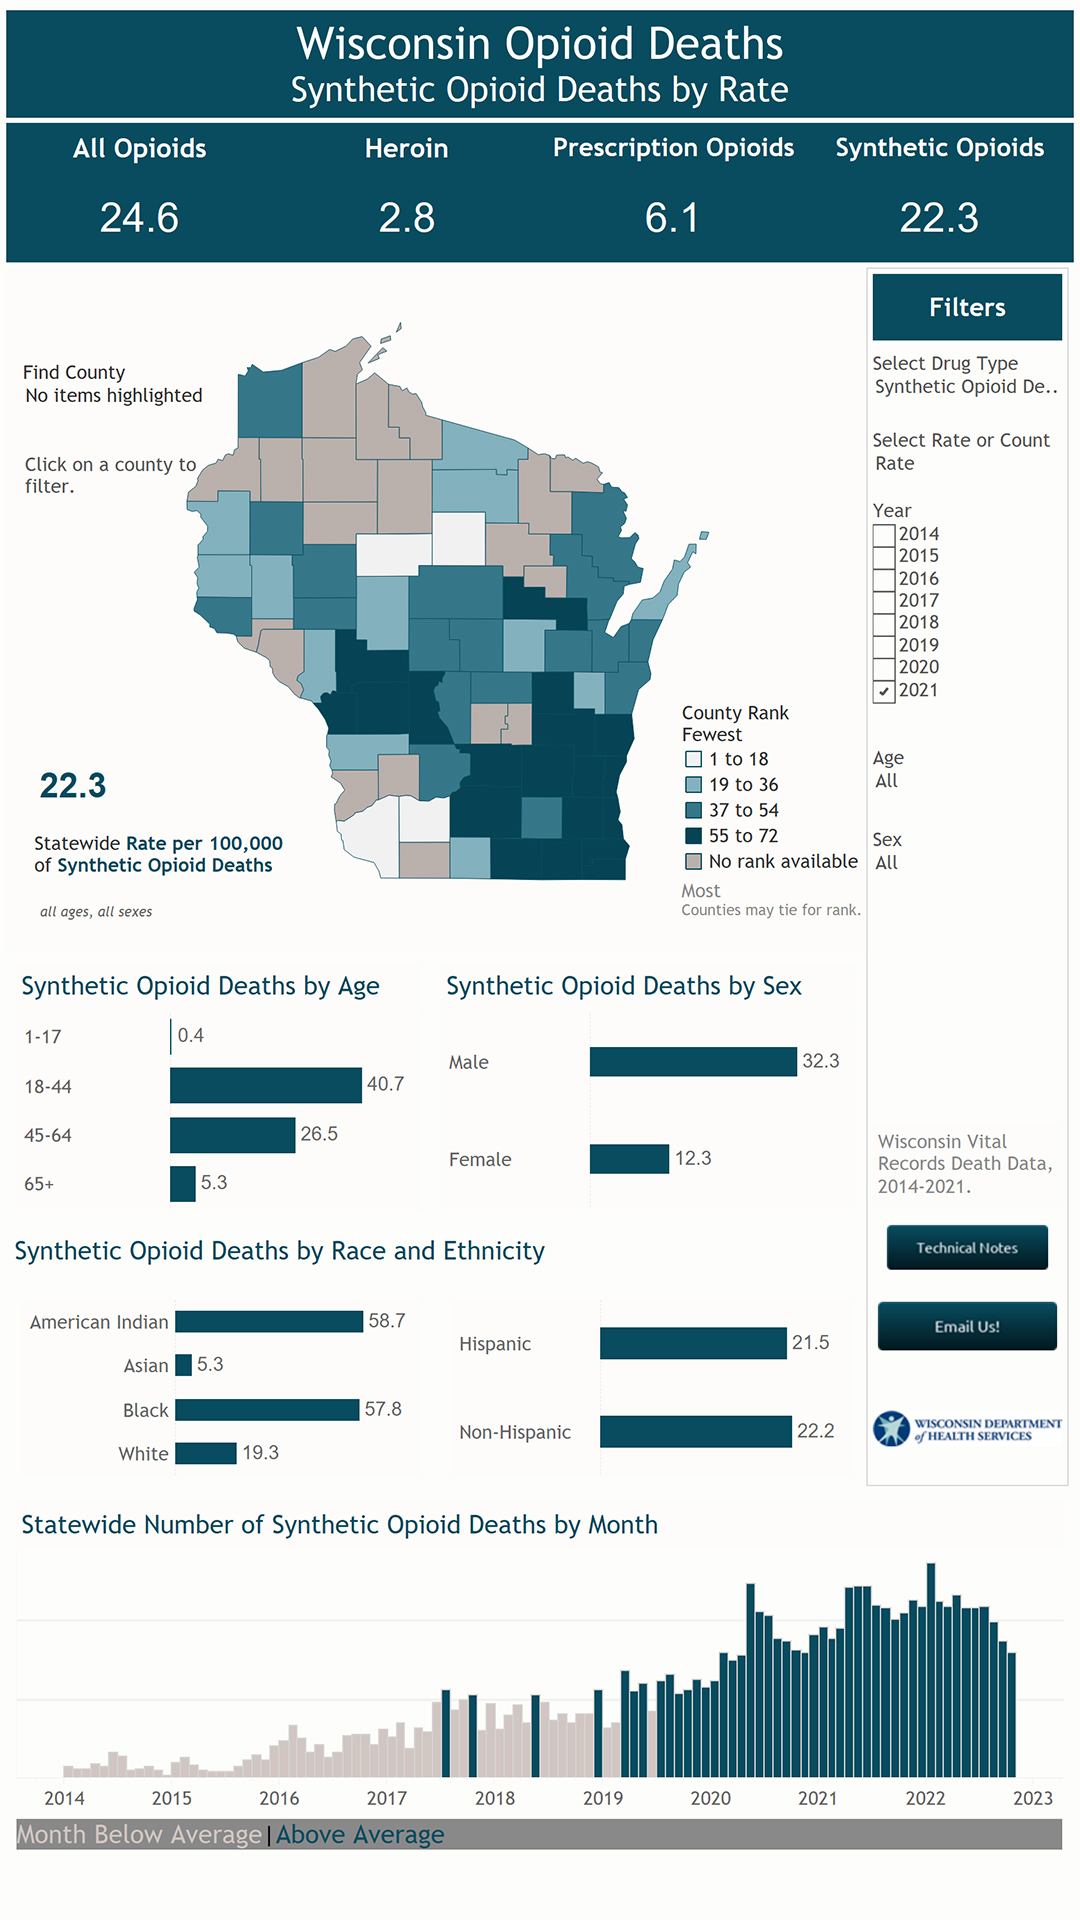 A data visualization with the title "Wisconsin Opioid Deaths" and subtitle "Synthetic Opioid Deaths by Rate" shows death rates due to opioids via a county-level map of Wisconsin, in bar charts organized by age, sex, race and ethnicity, and on a monthly basis from 2014 to 2023.